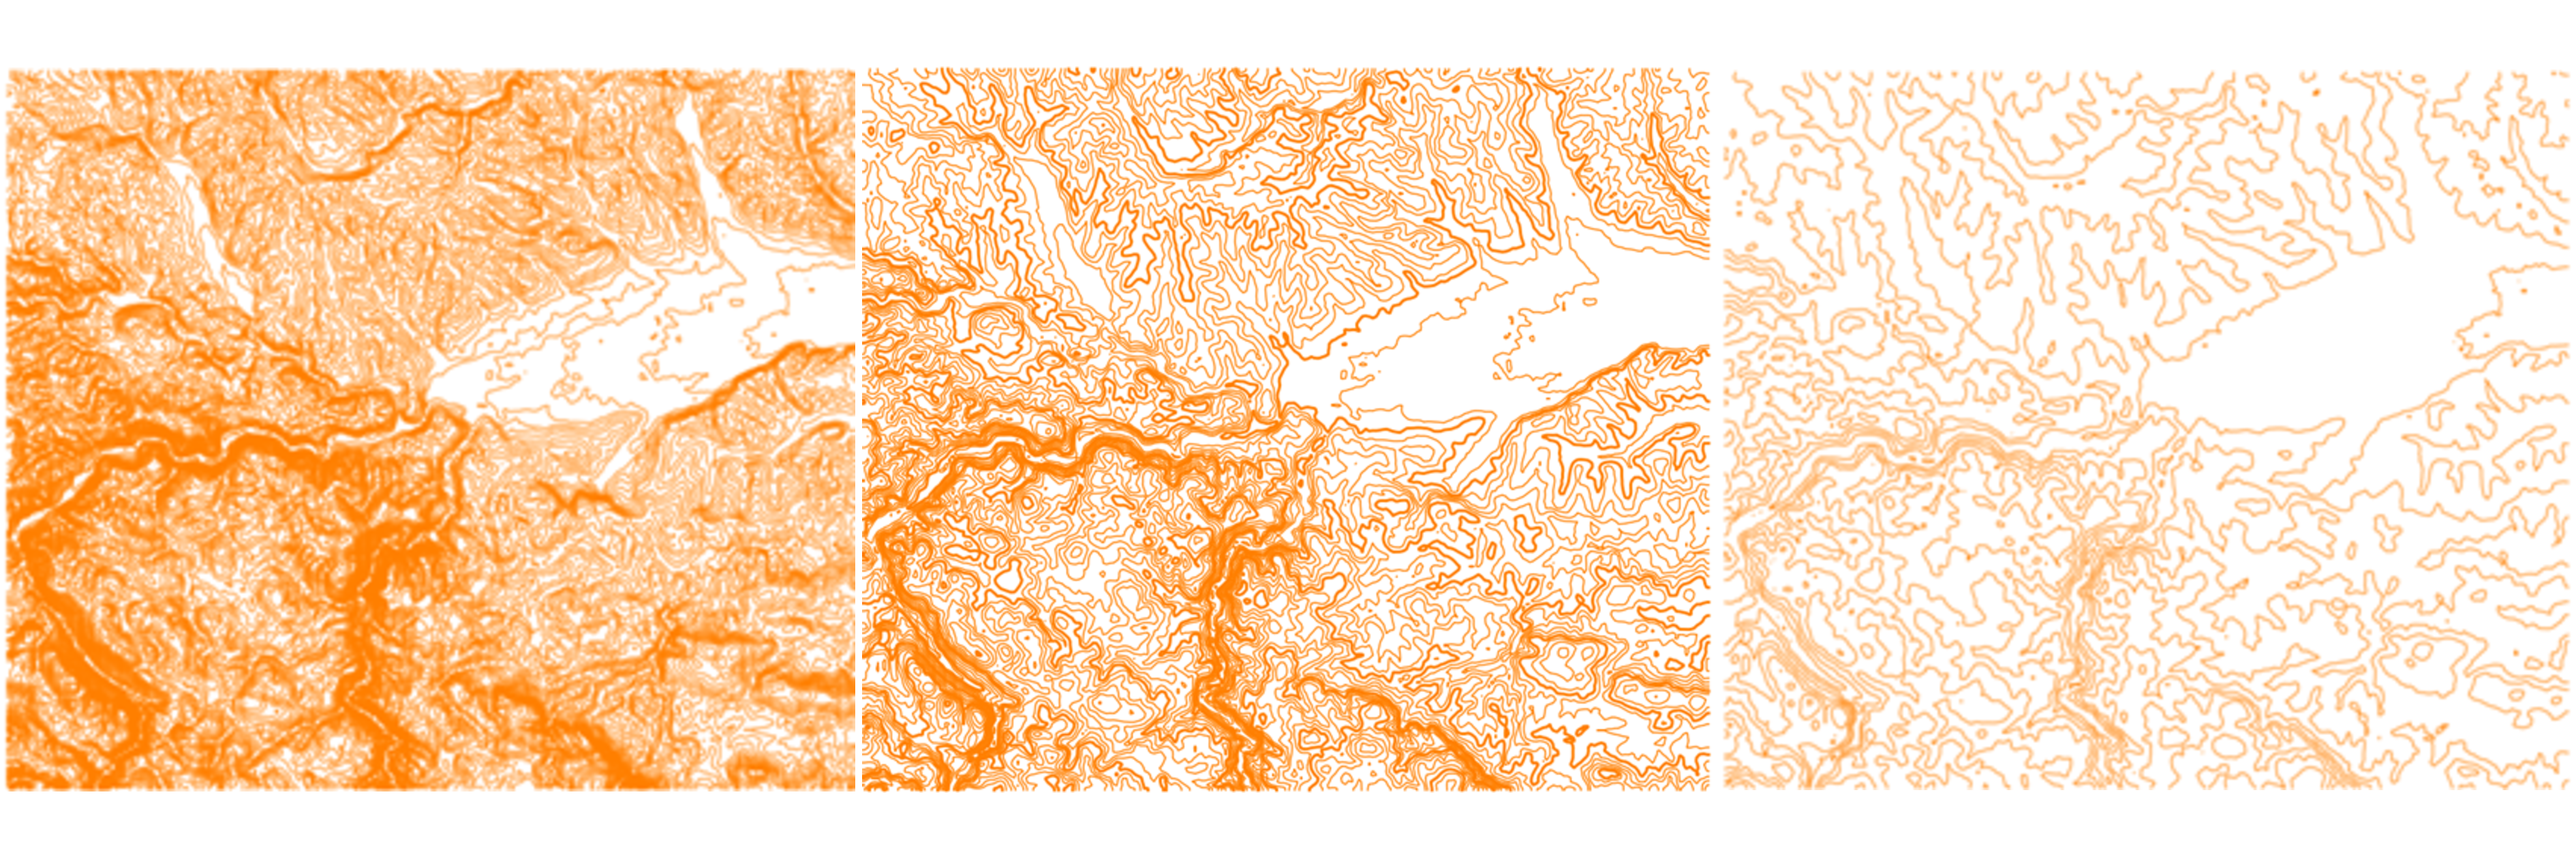 Isohypses generated in QGIS using the DEM (vicinity of the city of Valjevo, Serbia). (left)  Equidistance 10 m. (sredina) Equidistance 50 m. (desno) Equidistance 100 m.